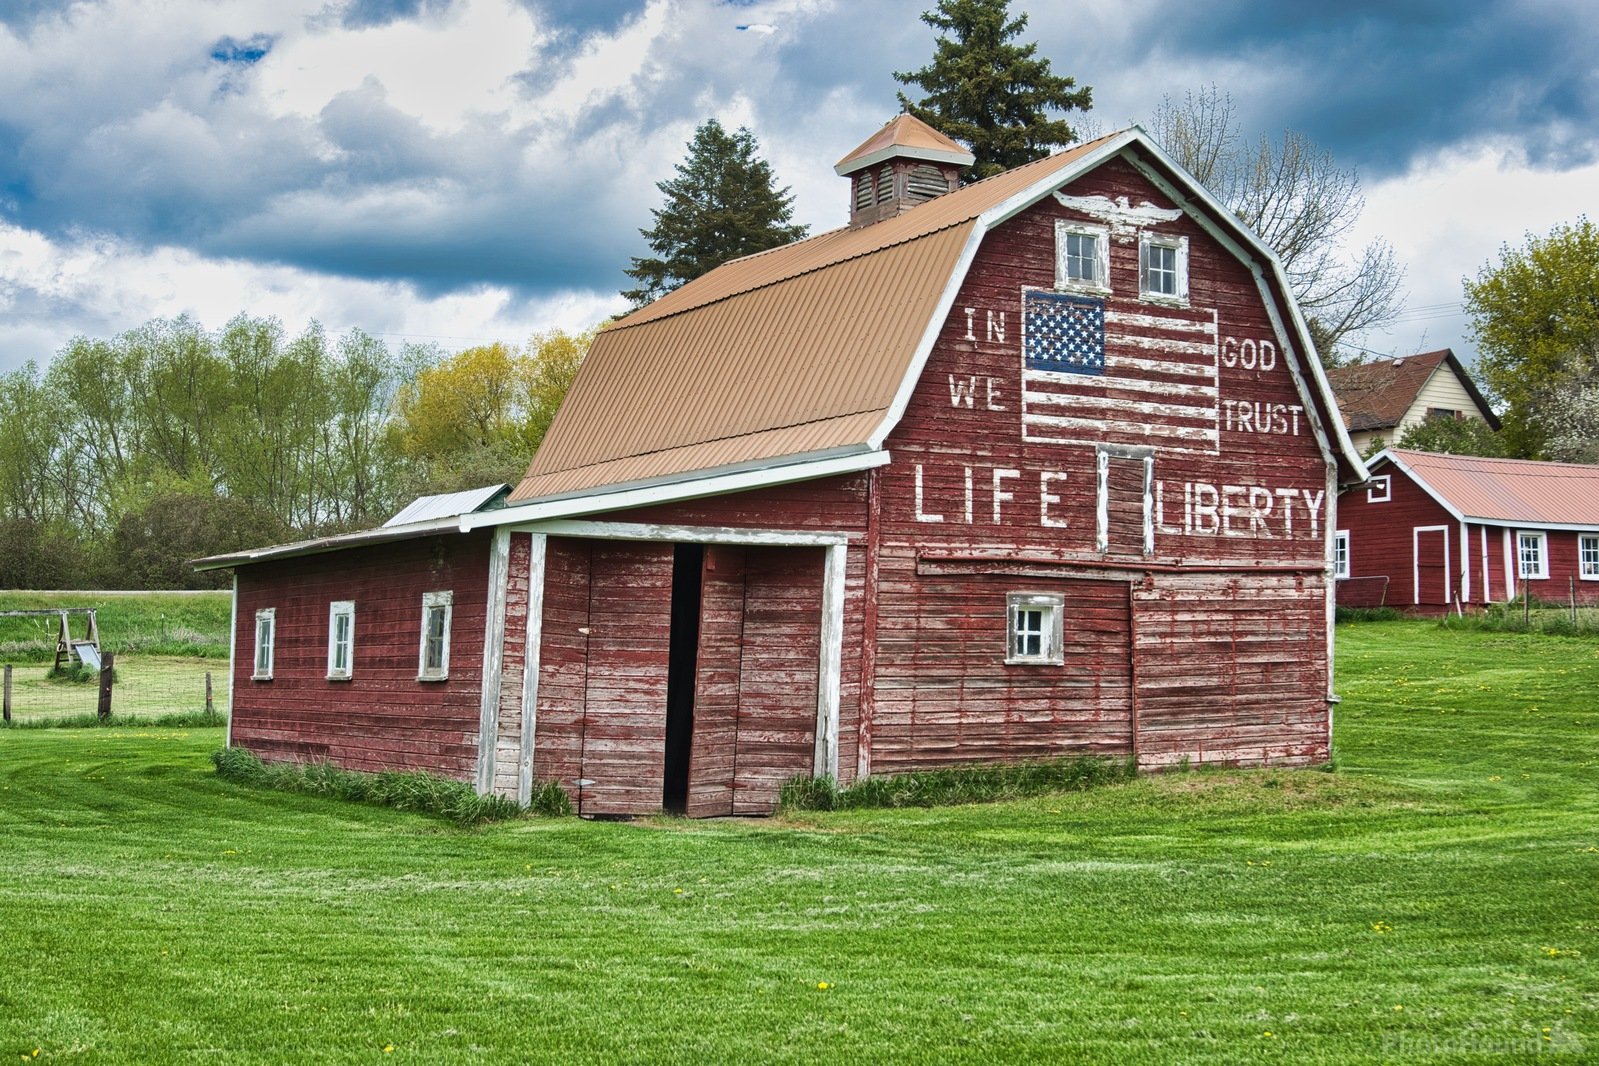 Image of In God We Trust Barn by Steve West